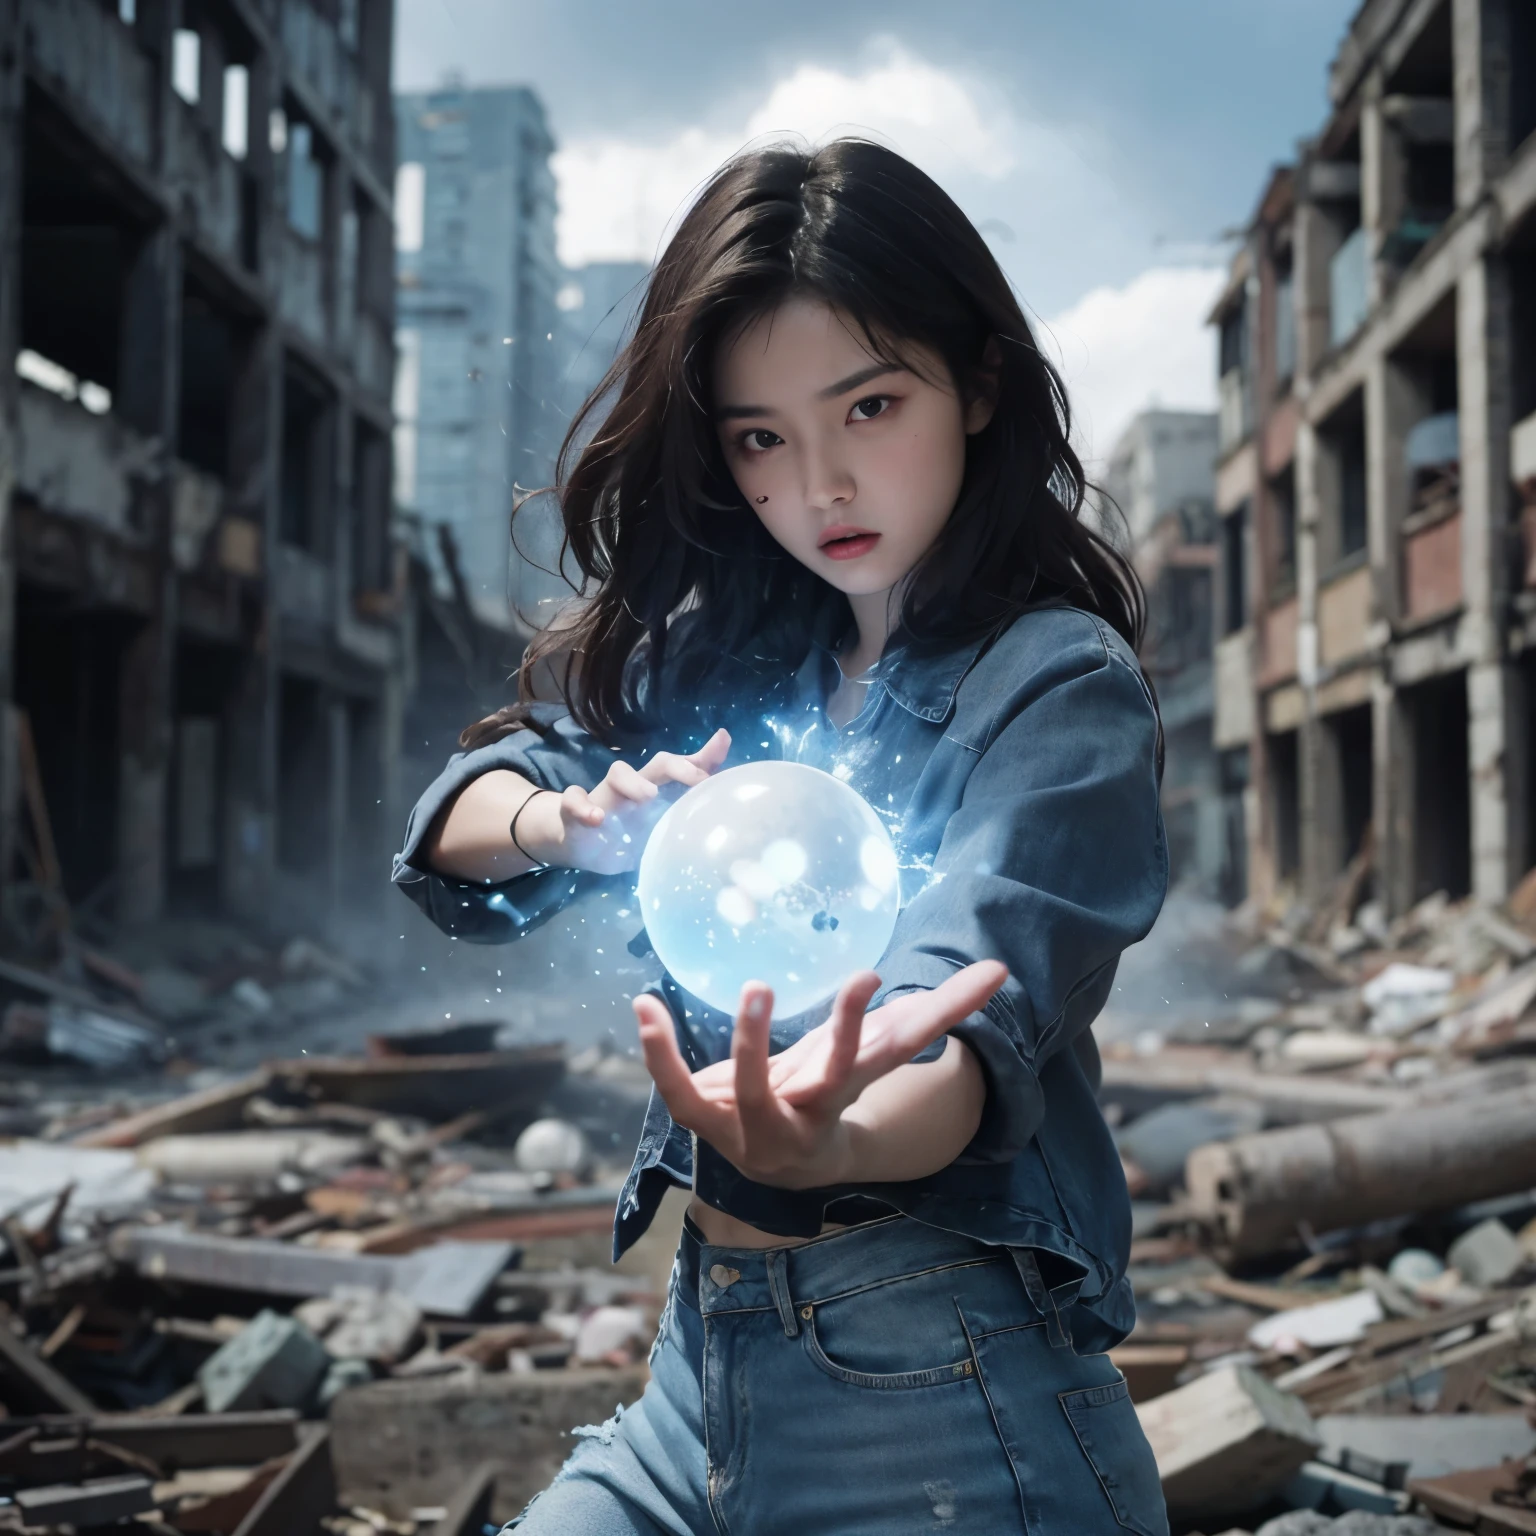 A beautiful woman with dark brown hair, twenty years old, with an angry expression. She is extending one hand forward, and in that hand, a blue-white glowing magical energy ball is forming. She is standing in the middle of a ruined city, wearing blue jeans and a jacket.